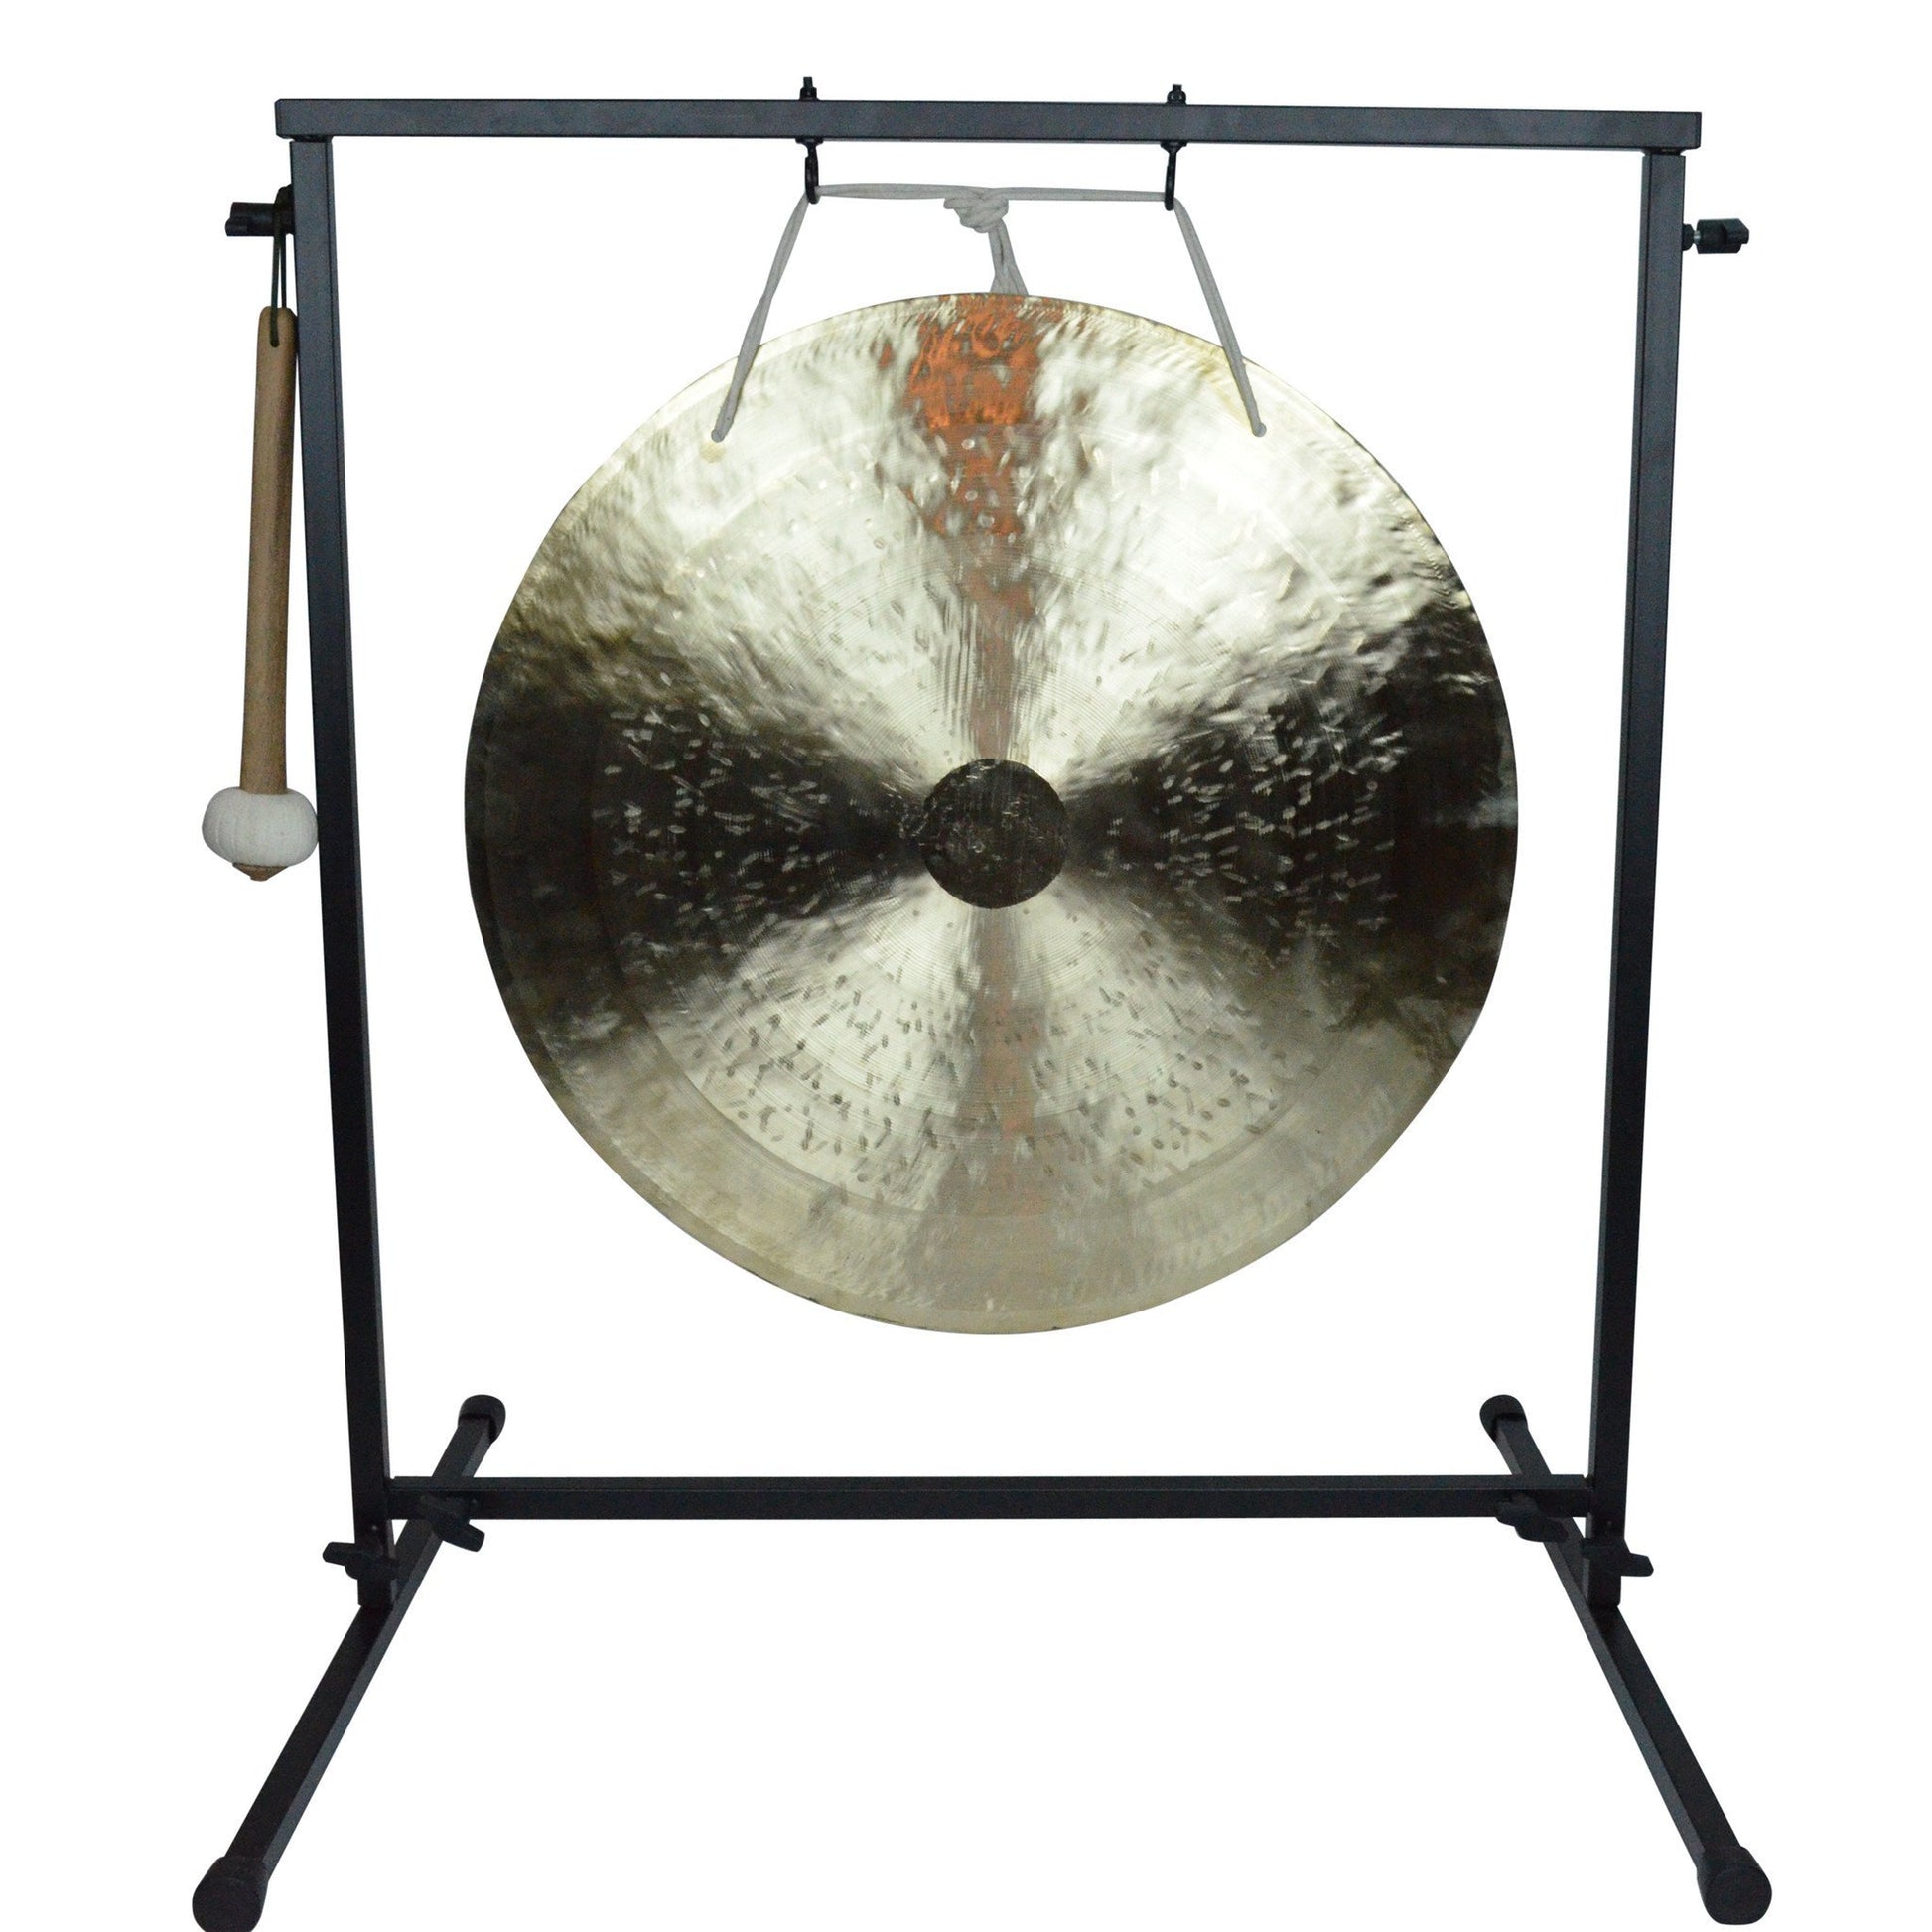 The Gong Shop Large Chinese Gongs with Stand Combos 24" to 34" 26" Wind Gong on Chronos Metal Gong Stand with Mallet